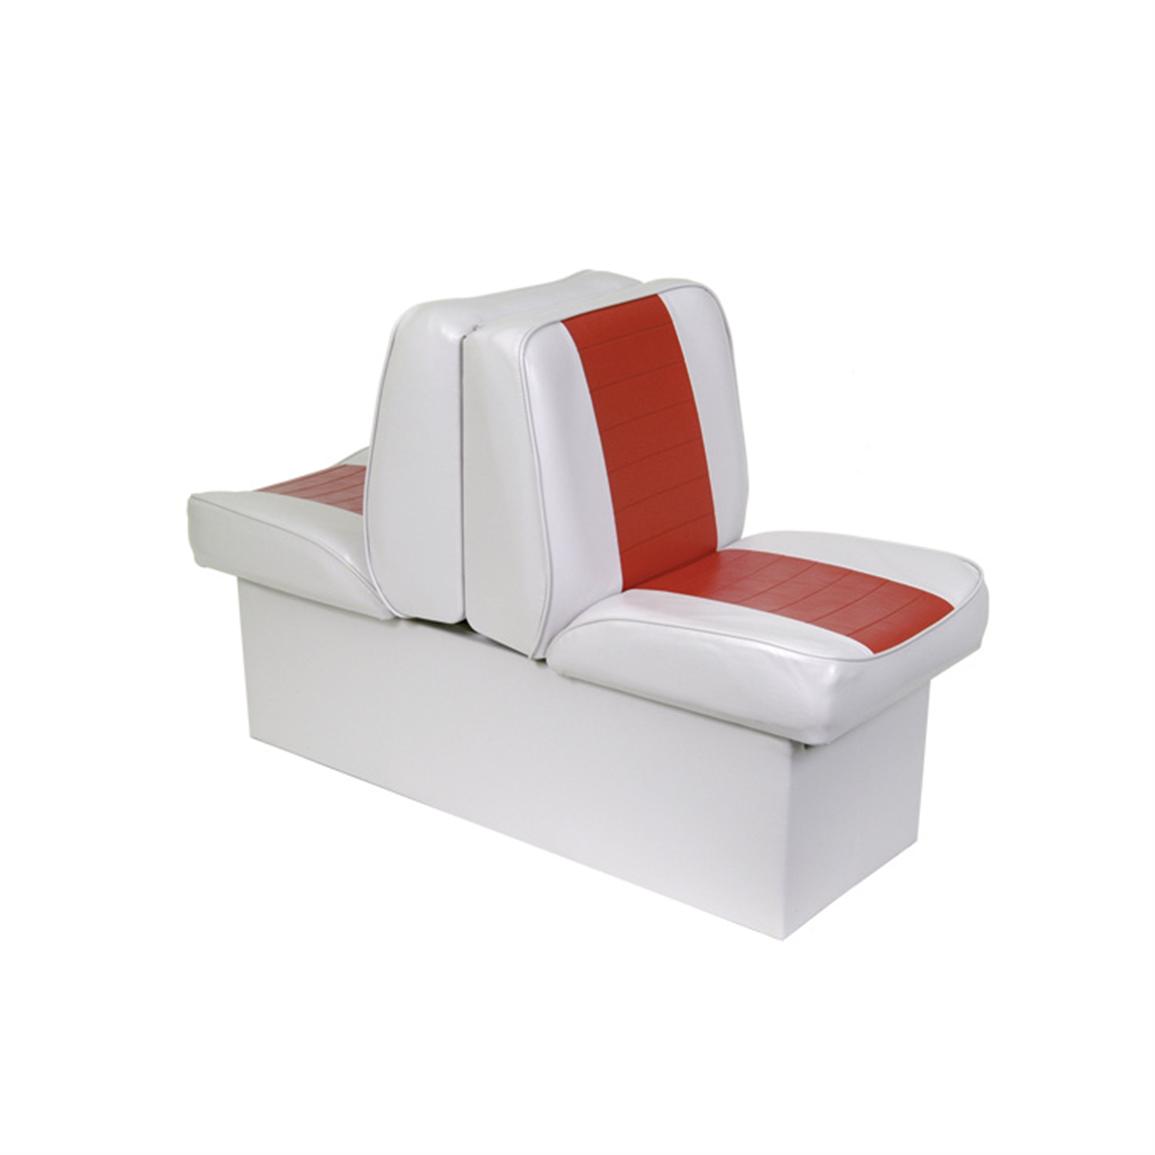 Action 10" Super Value Lounge Boat Seat - 95994, Fold Down Seats at